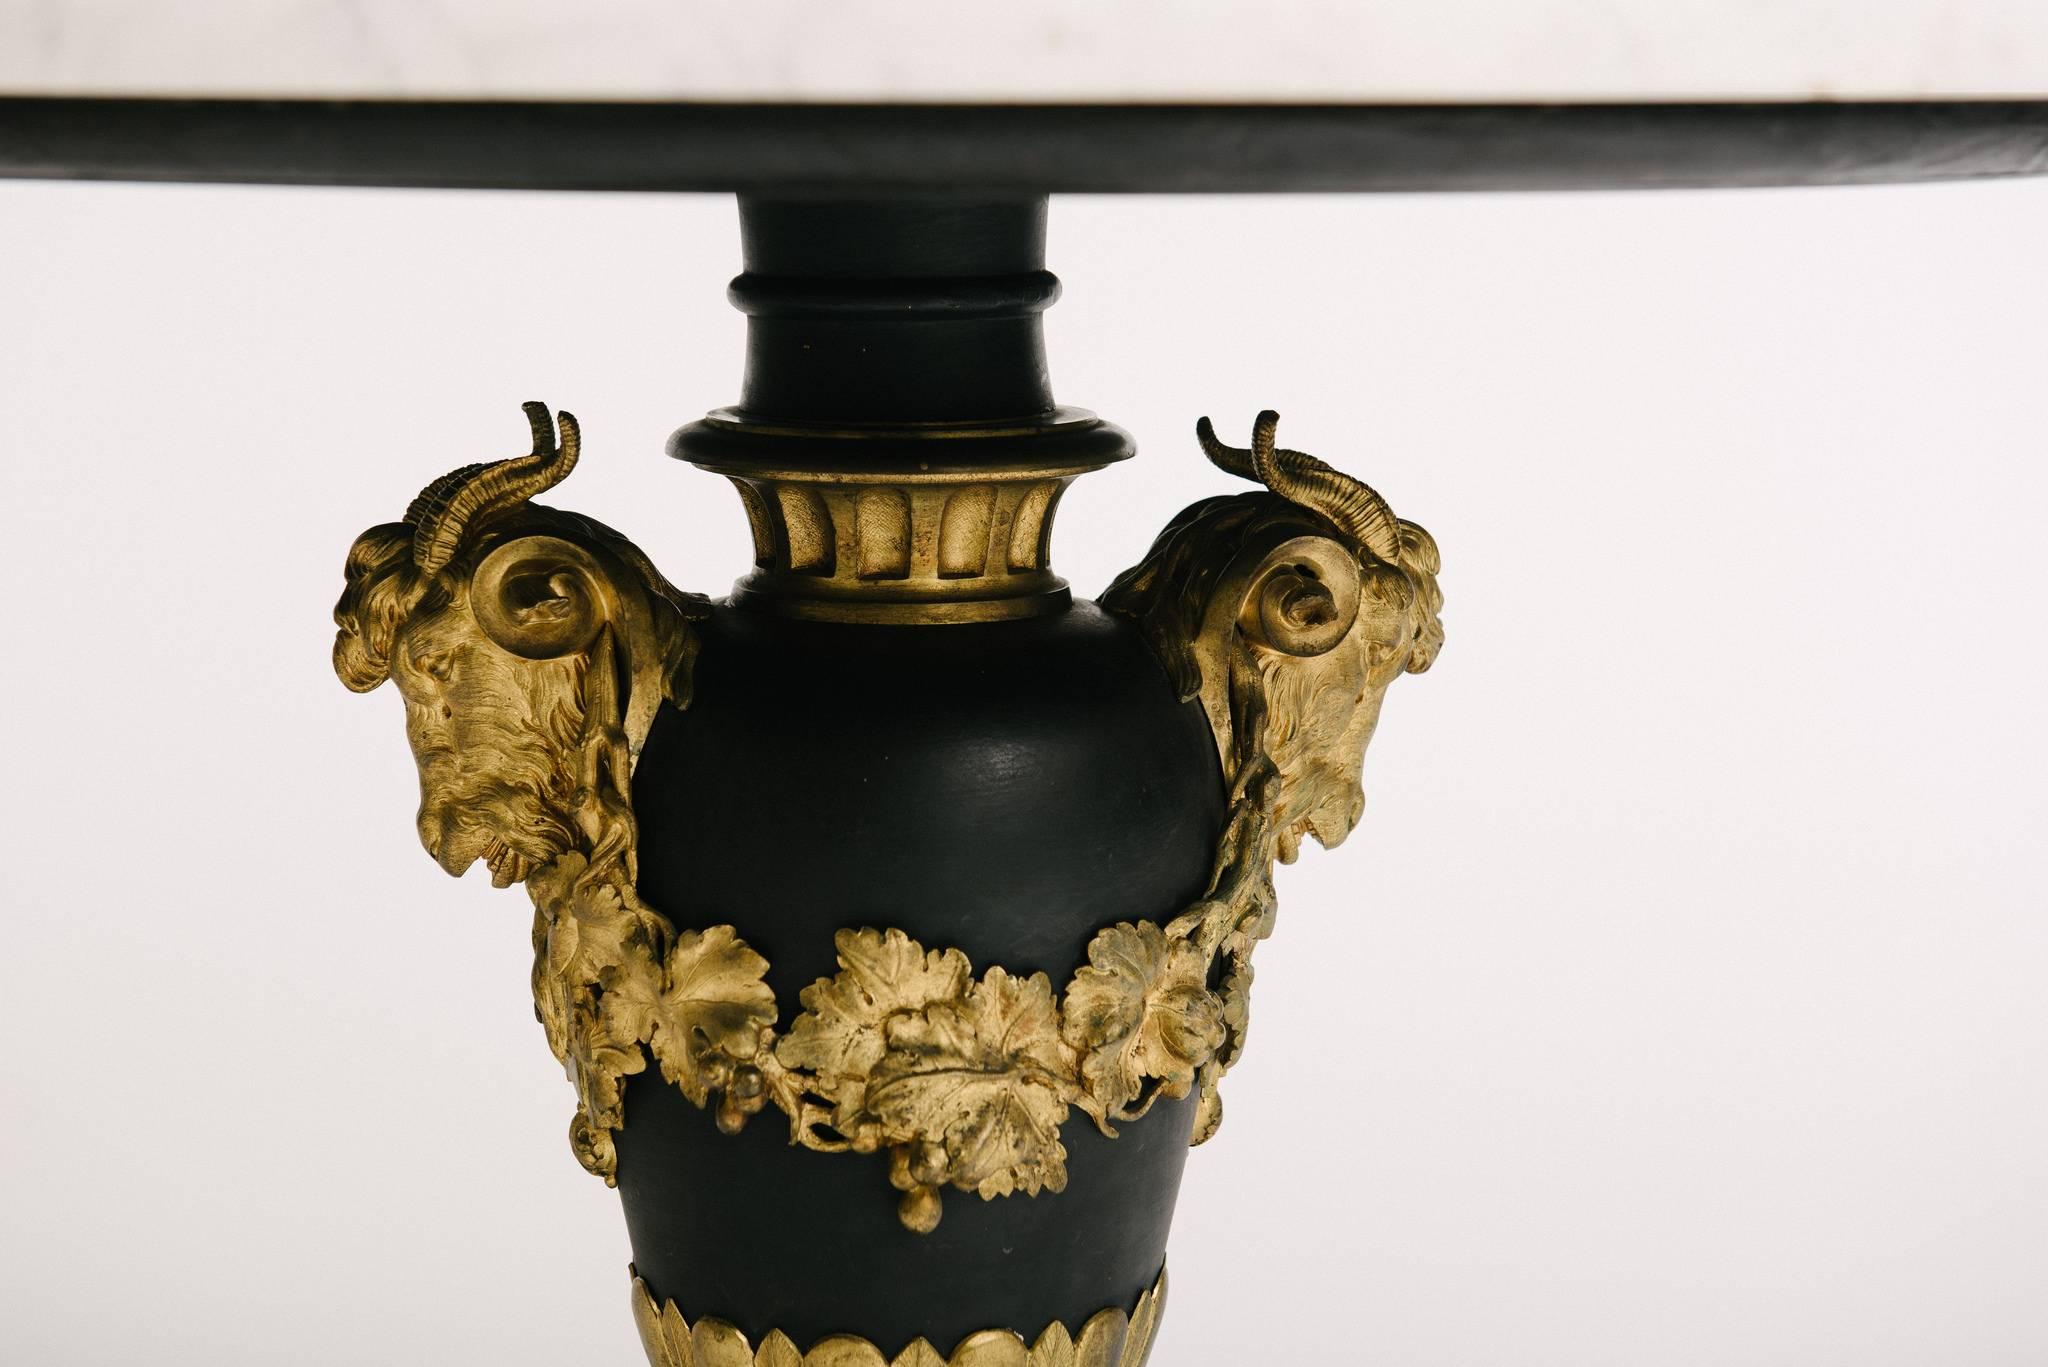 A 19th century French neoclassical style patinated bronze gueridon with white marble top. This beautiful table features rams heads, garlands of oak leaves and quintessential classical detailing.